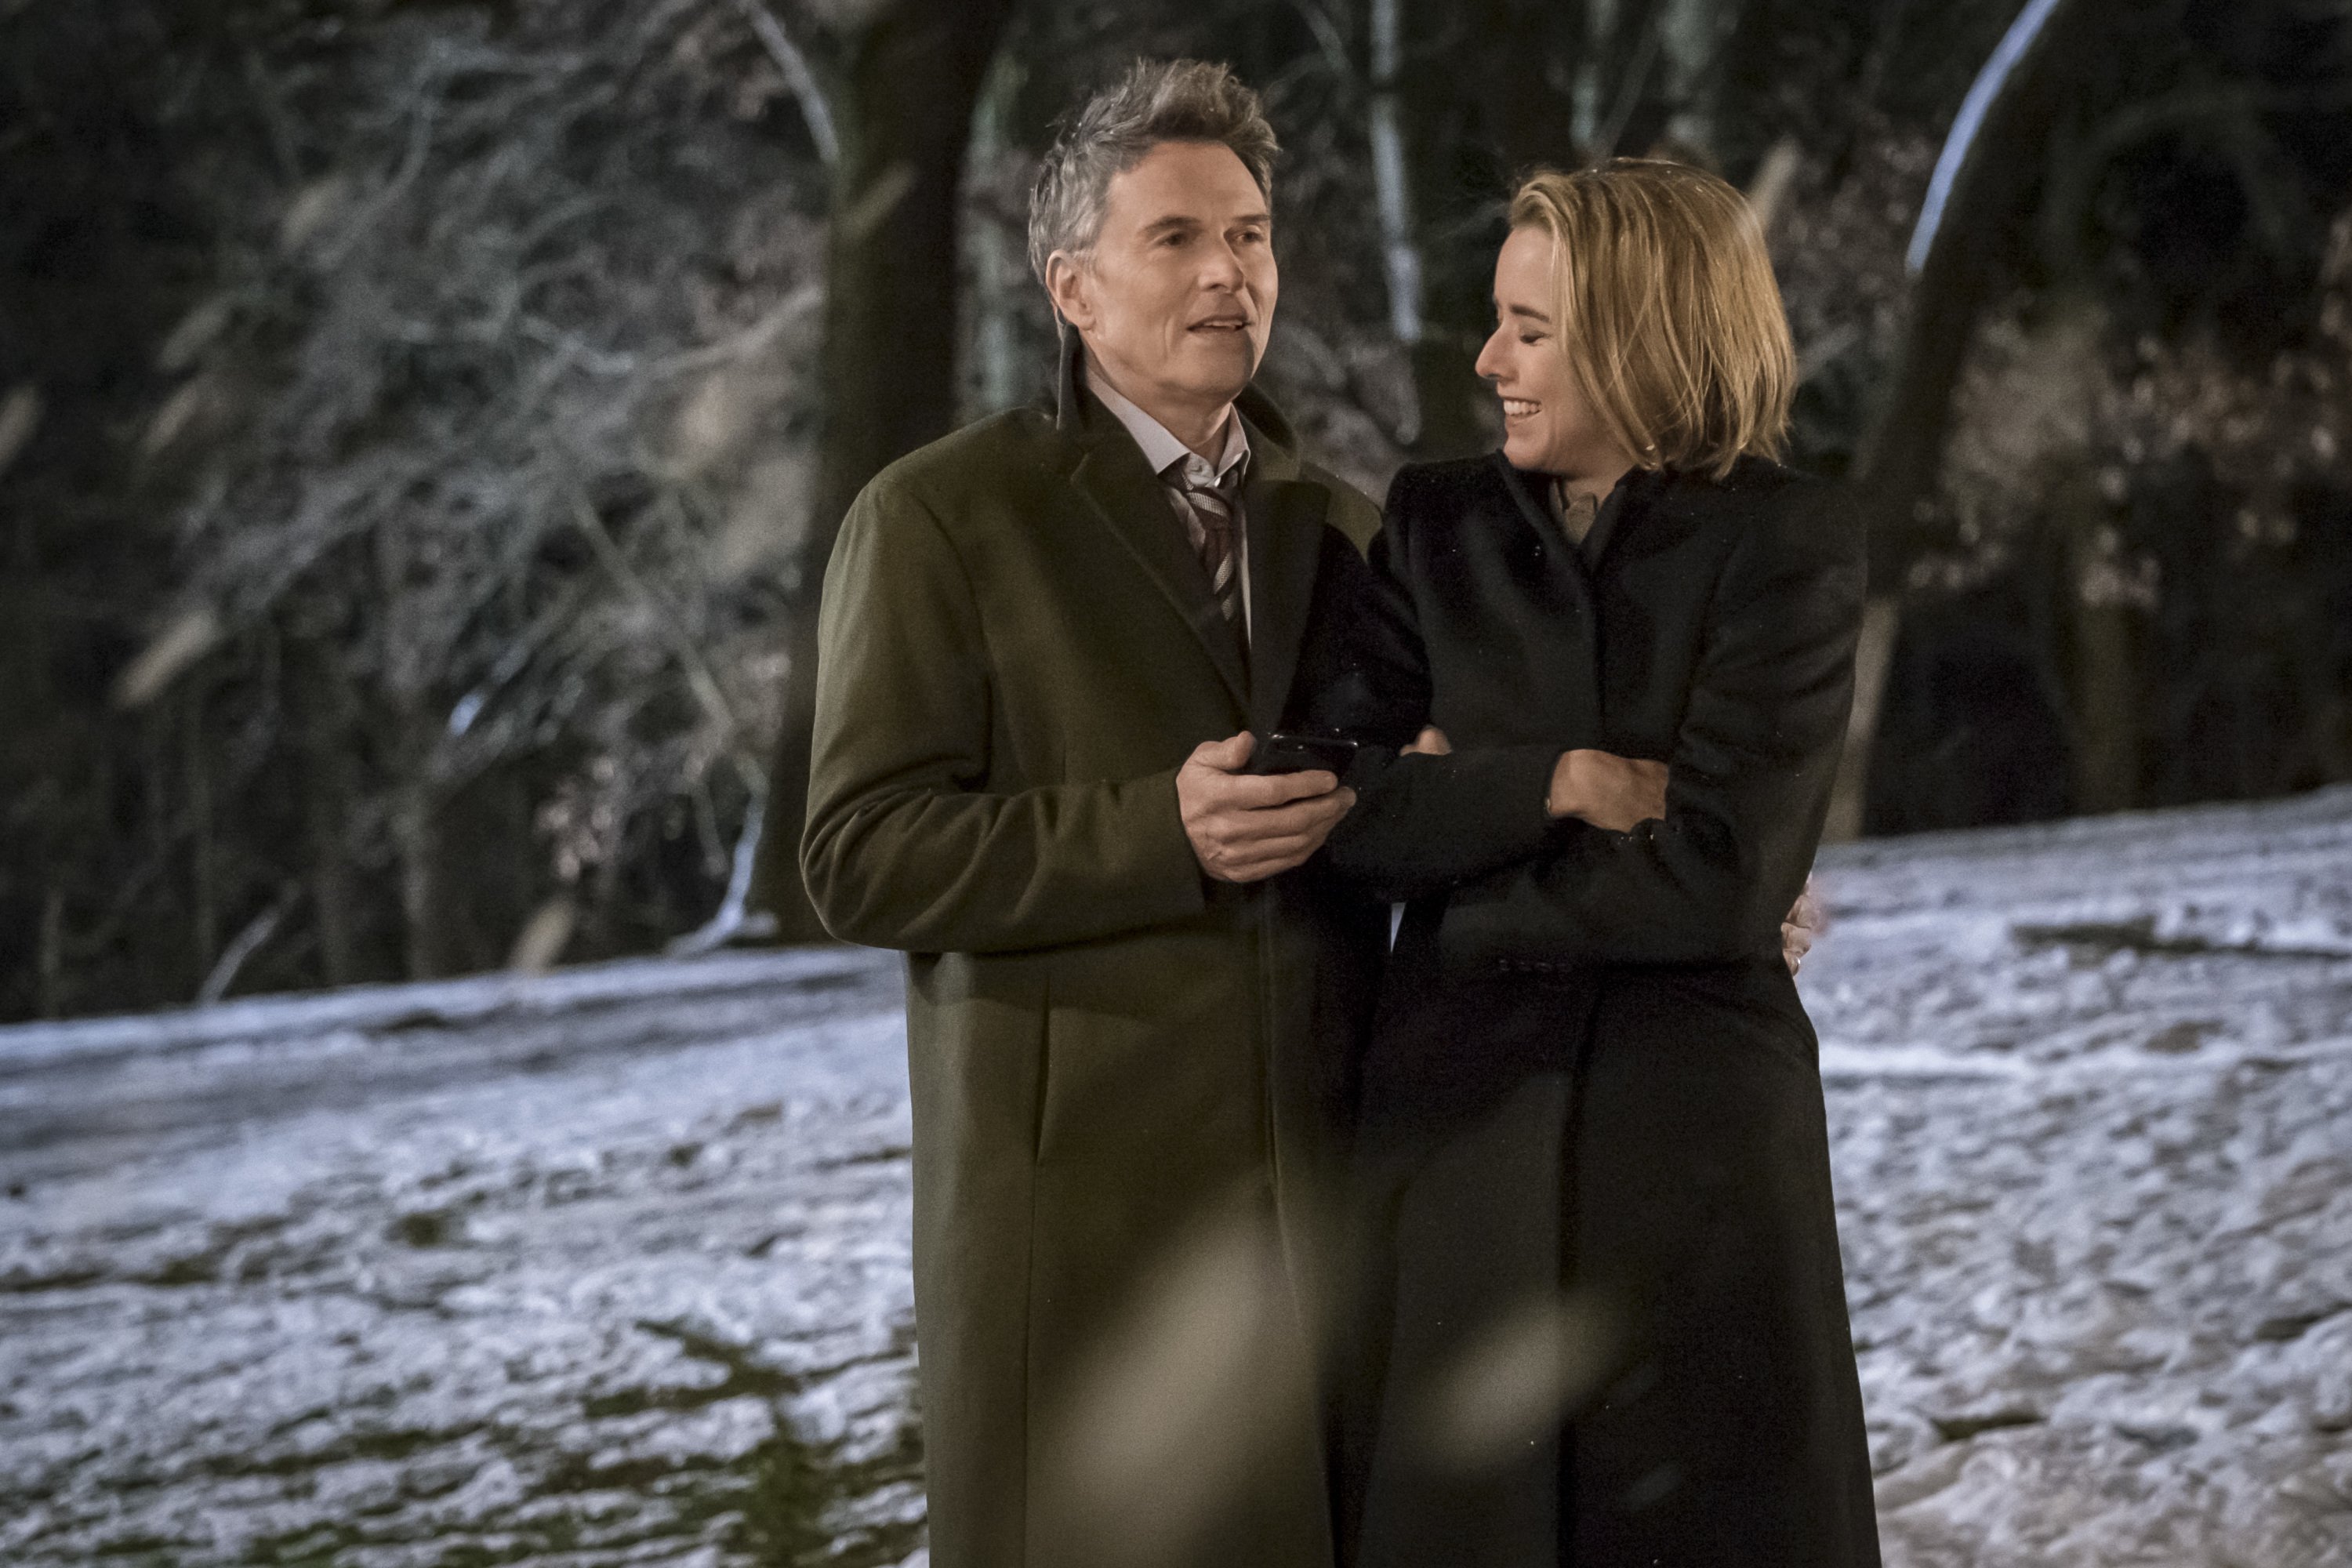 Tim Daly as Henry McCord and Téa Leoni as Elizabeth McCord on "Madam Secretary" on December 11, 2017 | Source: Getty Images